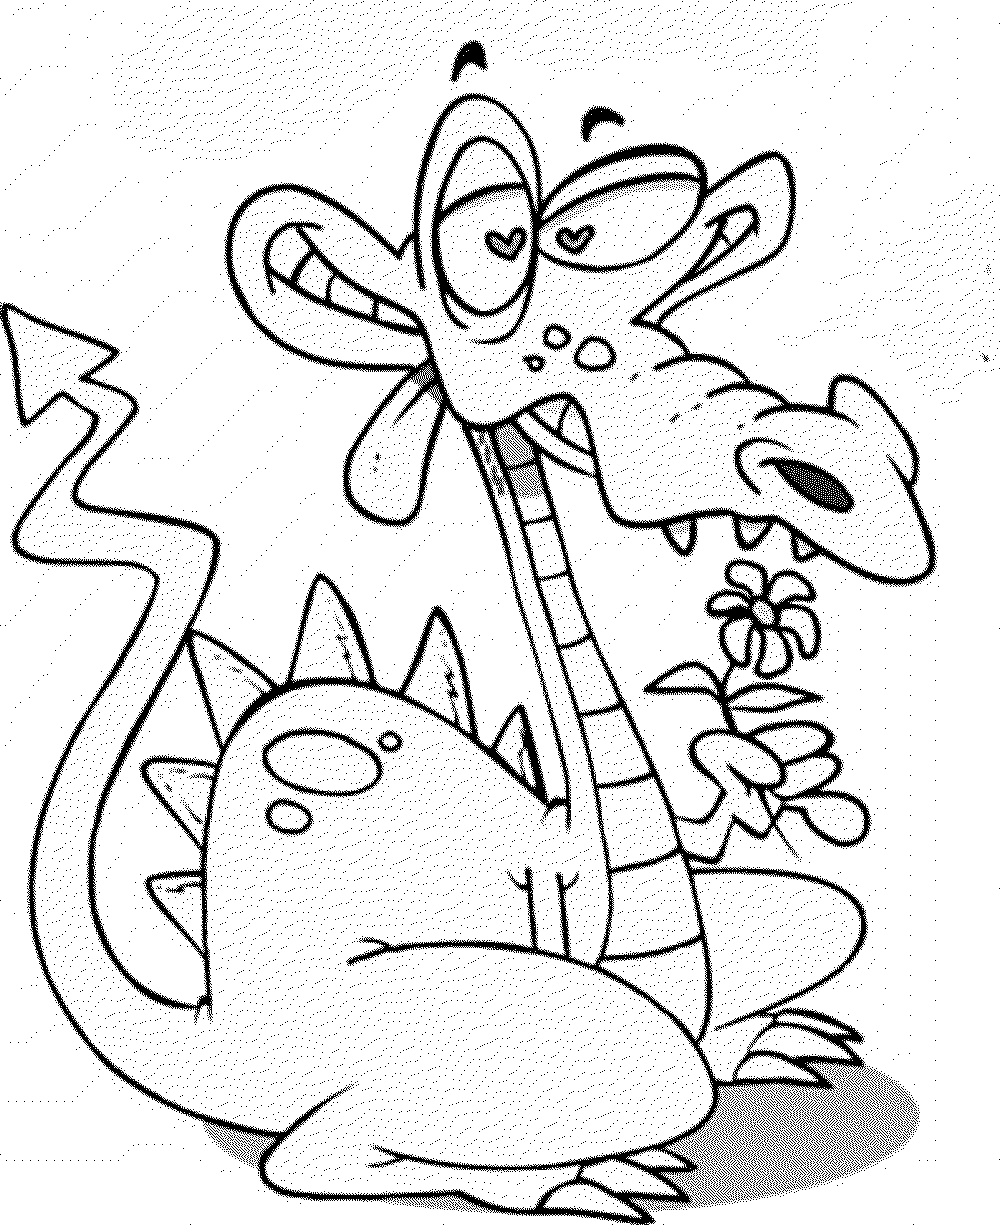 Download cool-dragon-coloring-pages | | BestAppsForKids.com